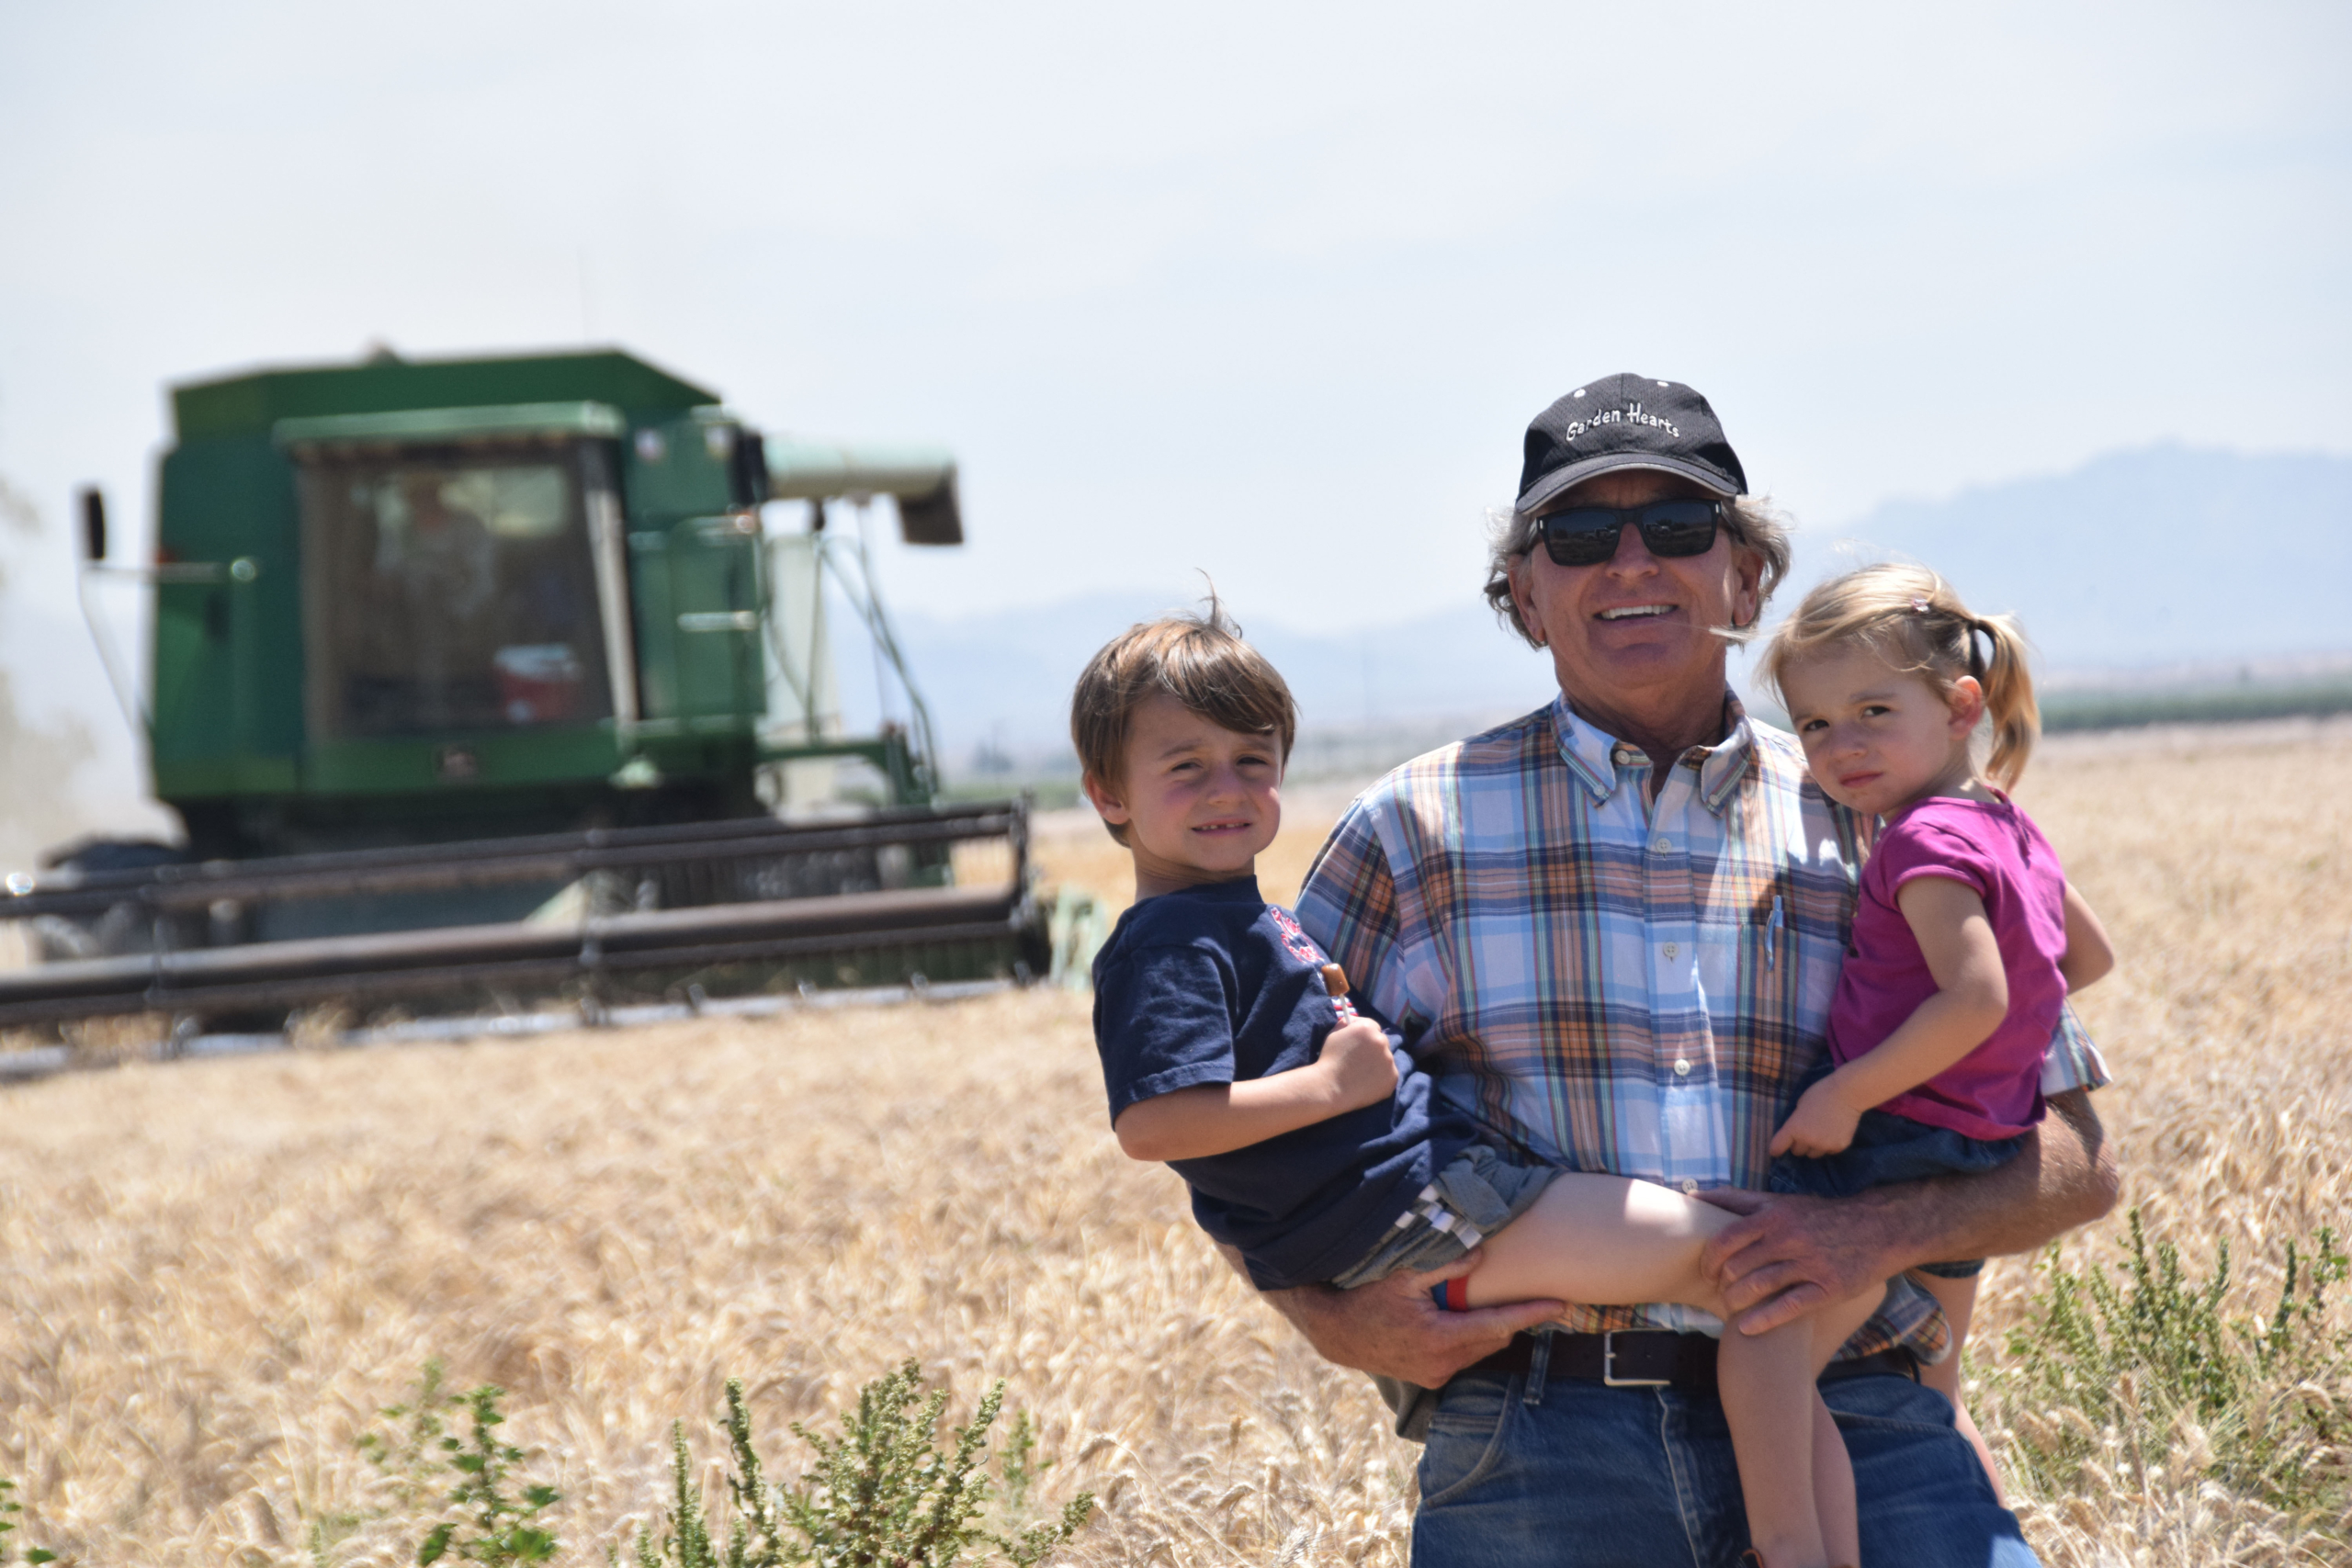 California grower Roy Motter innovative farming practices like crop rotations. rotation crop to 